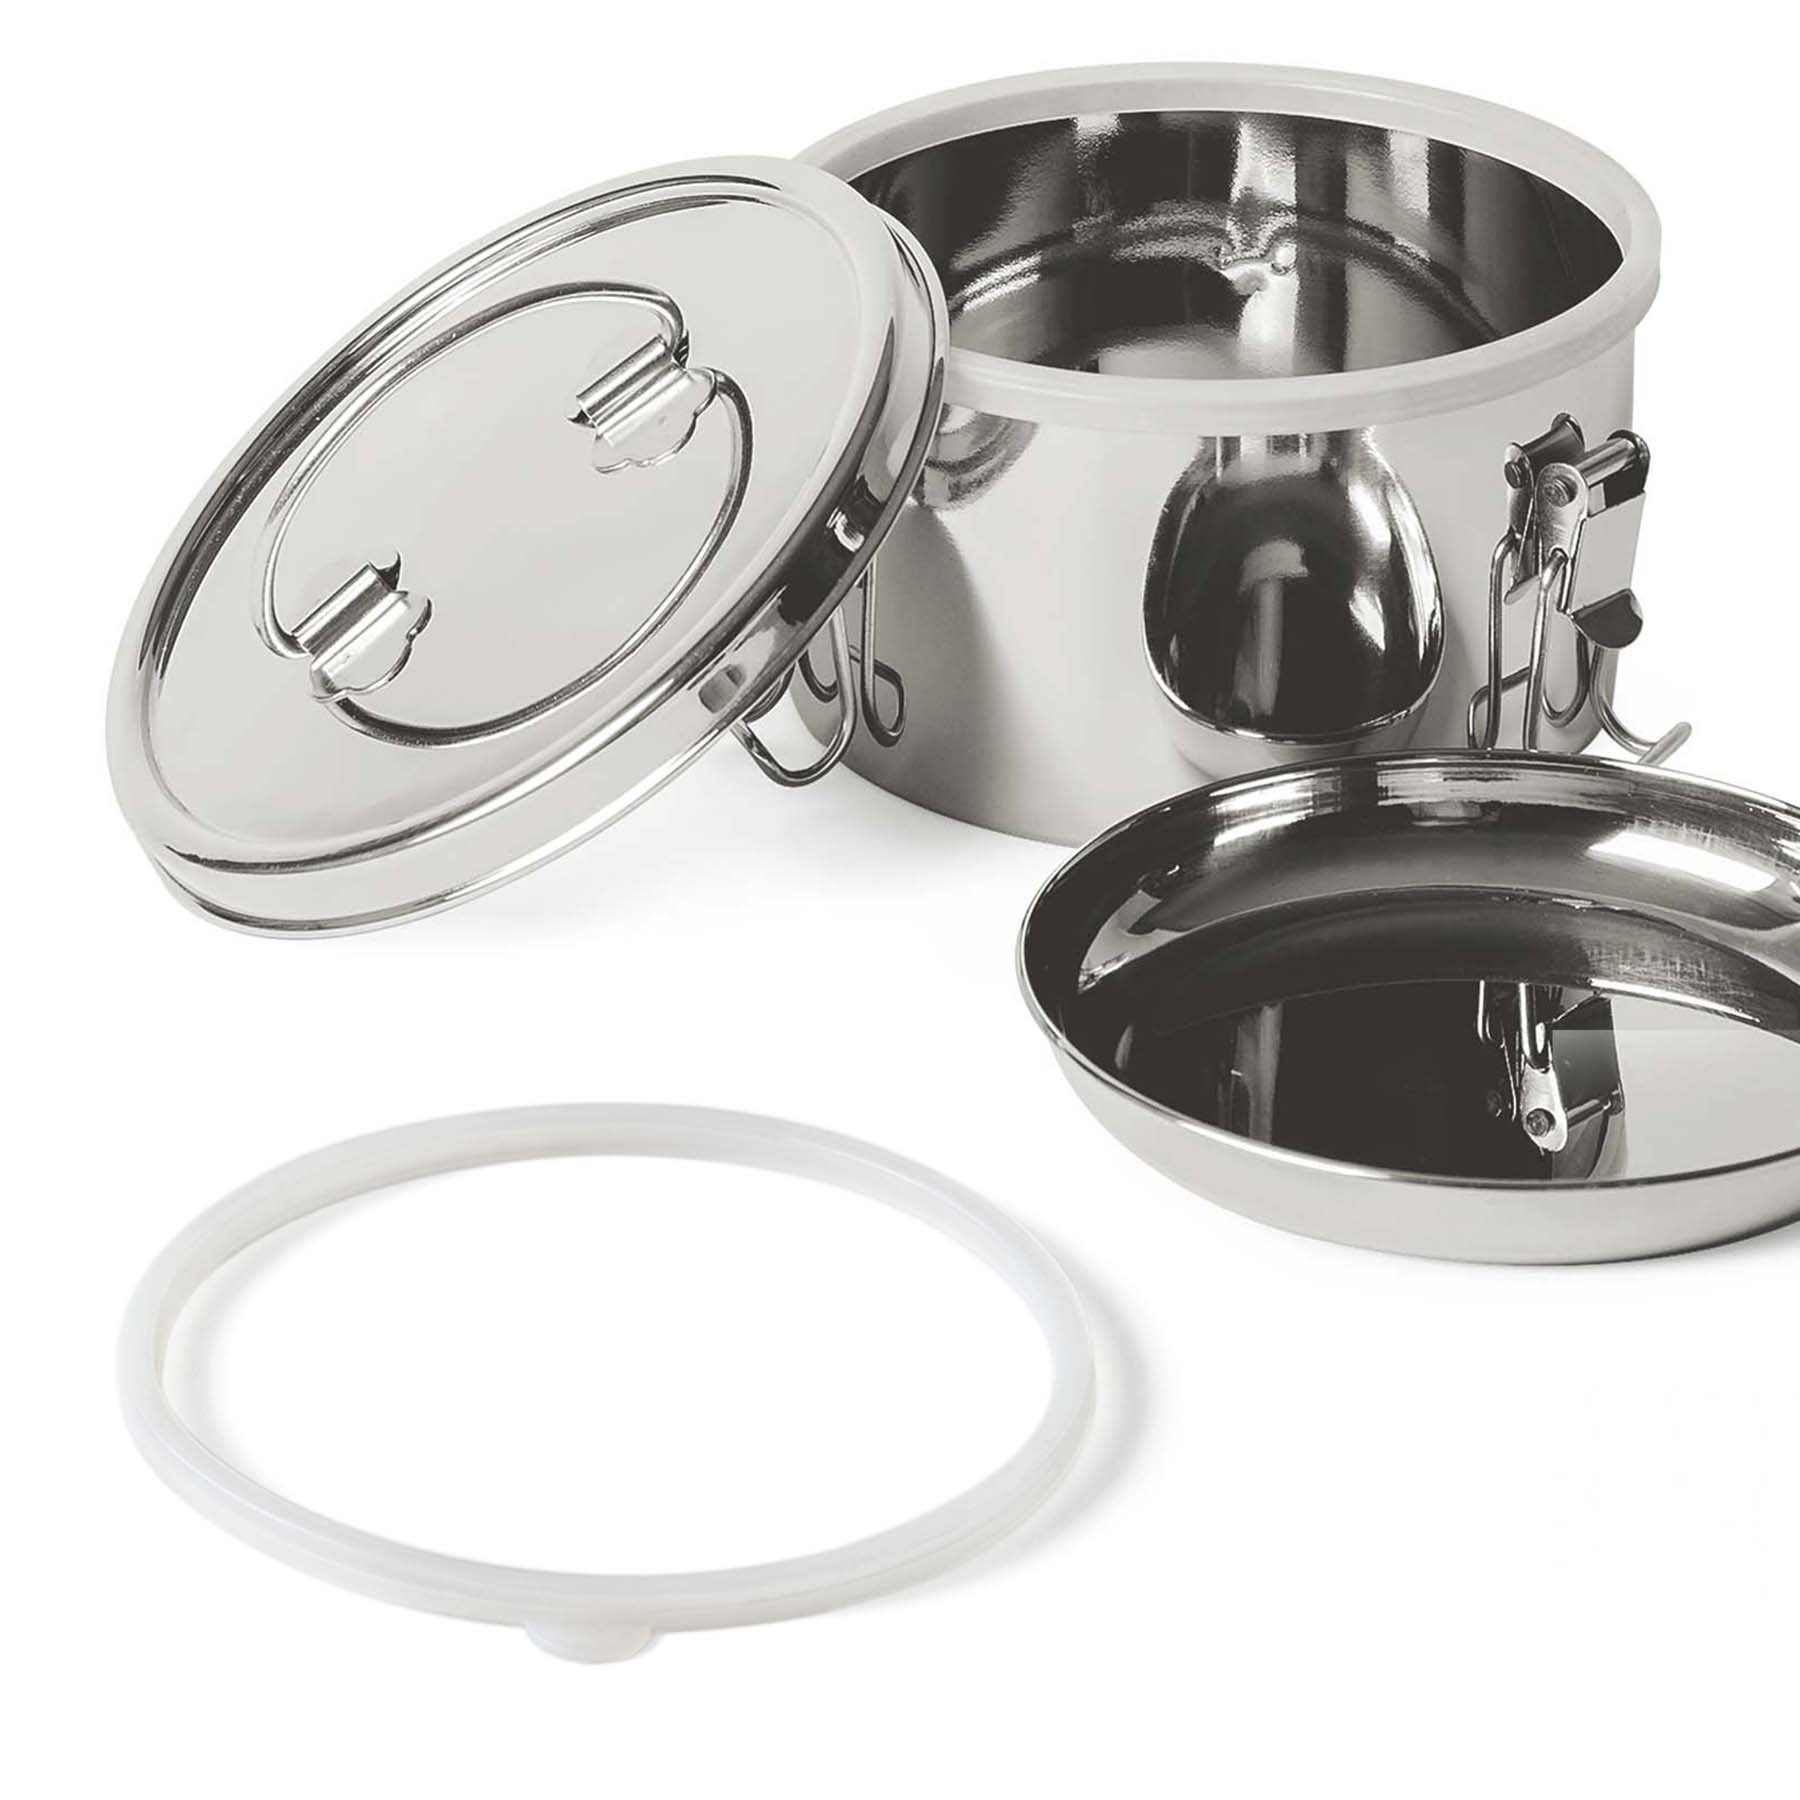 Silicone ring for Tiffin Bowl+